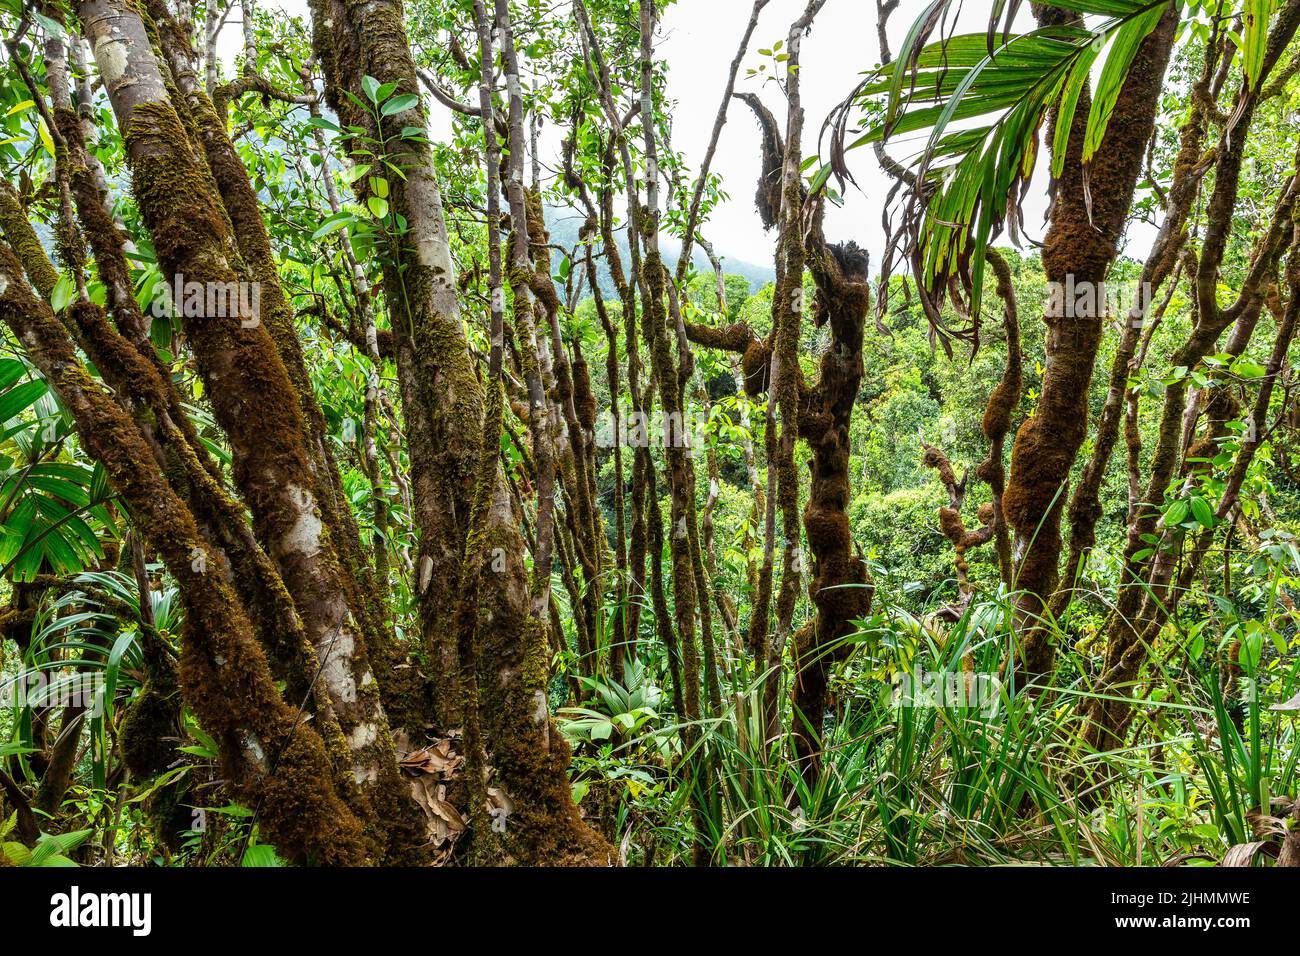 Pristine intact ancient forest with tree trunks overgrown with moss and lichen in Morne Seychelles National Park on Mahe Island, Seychelles. Stock Photo